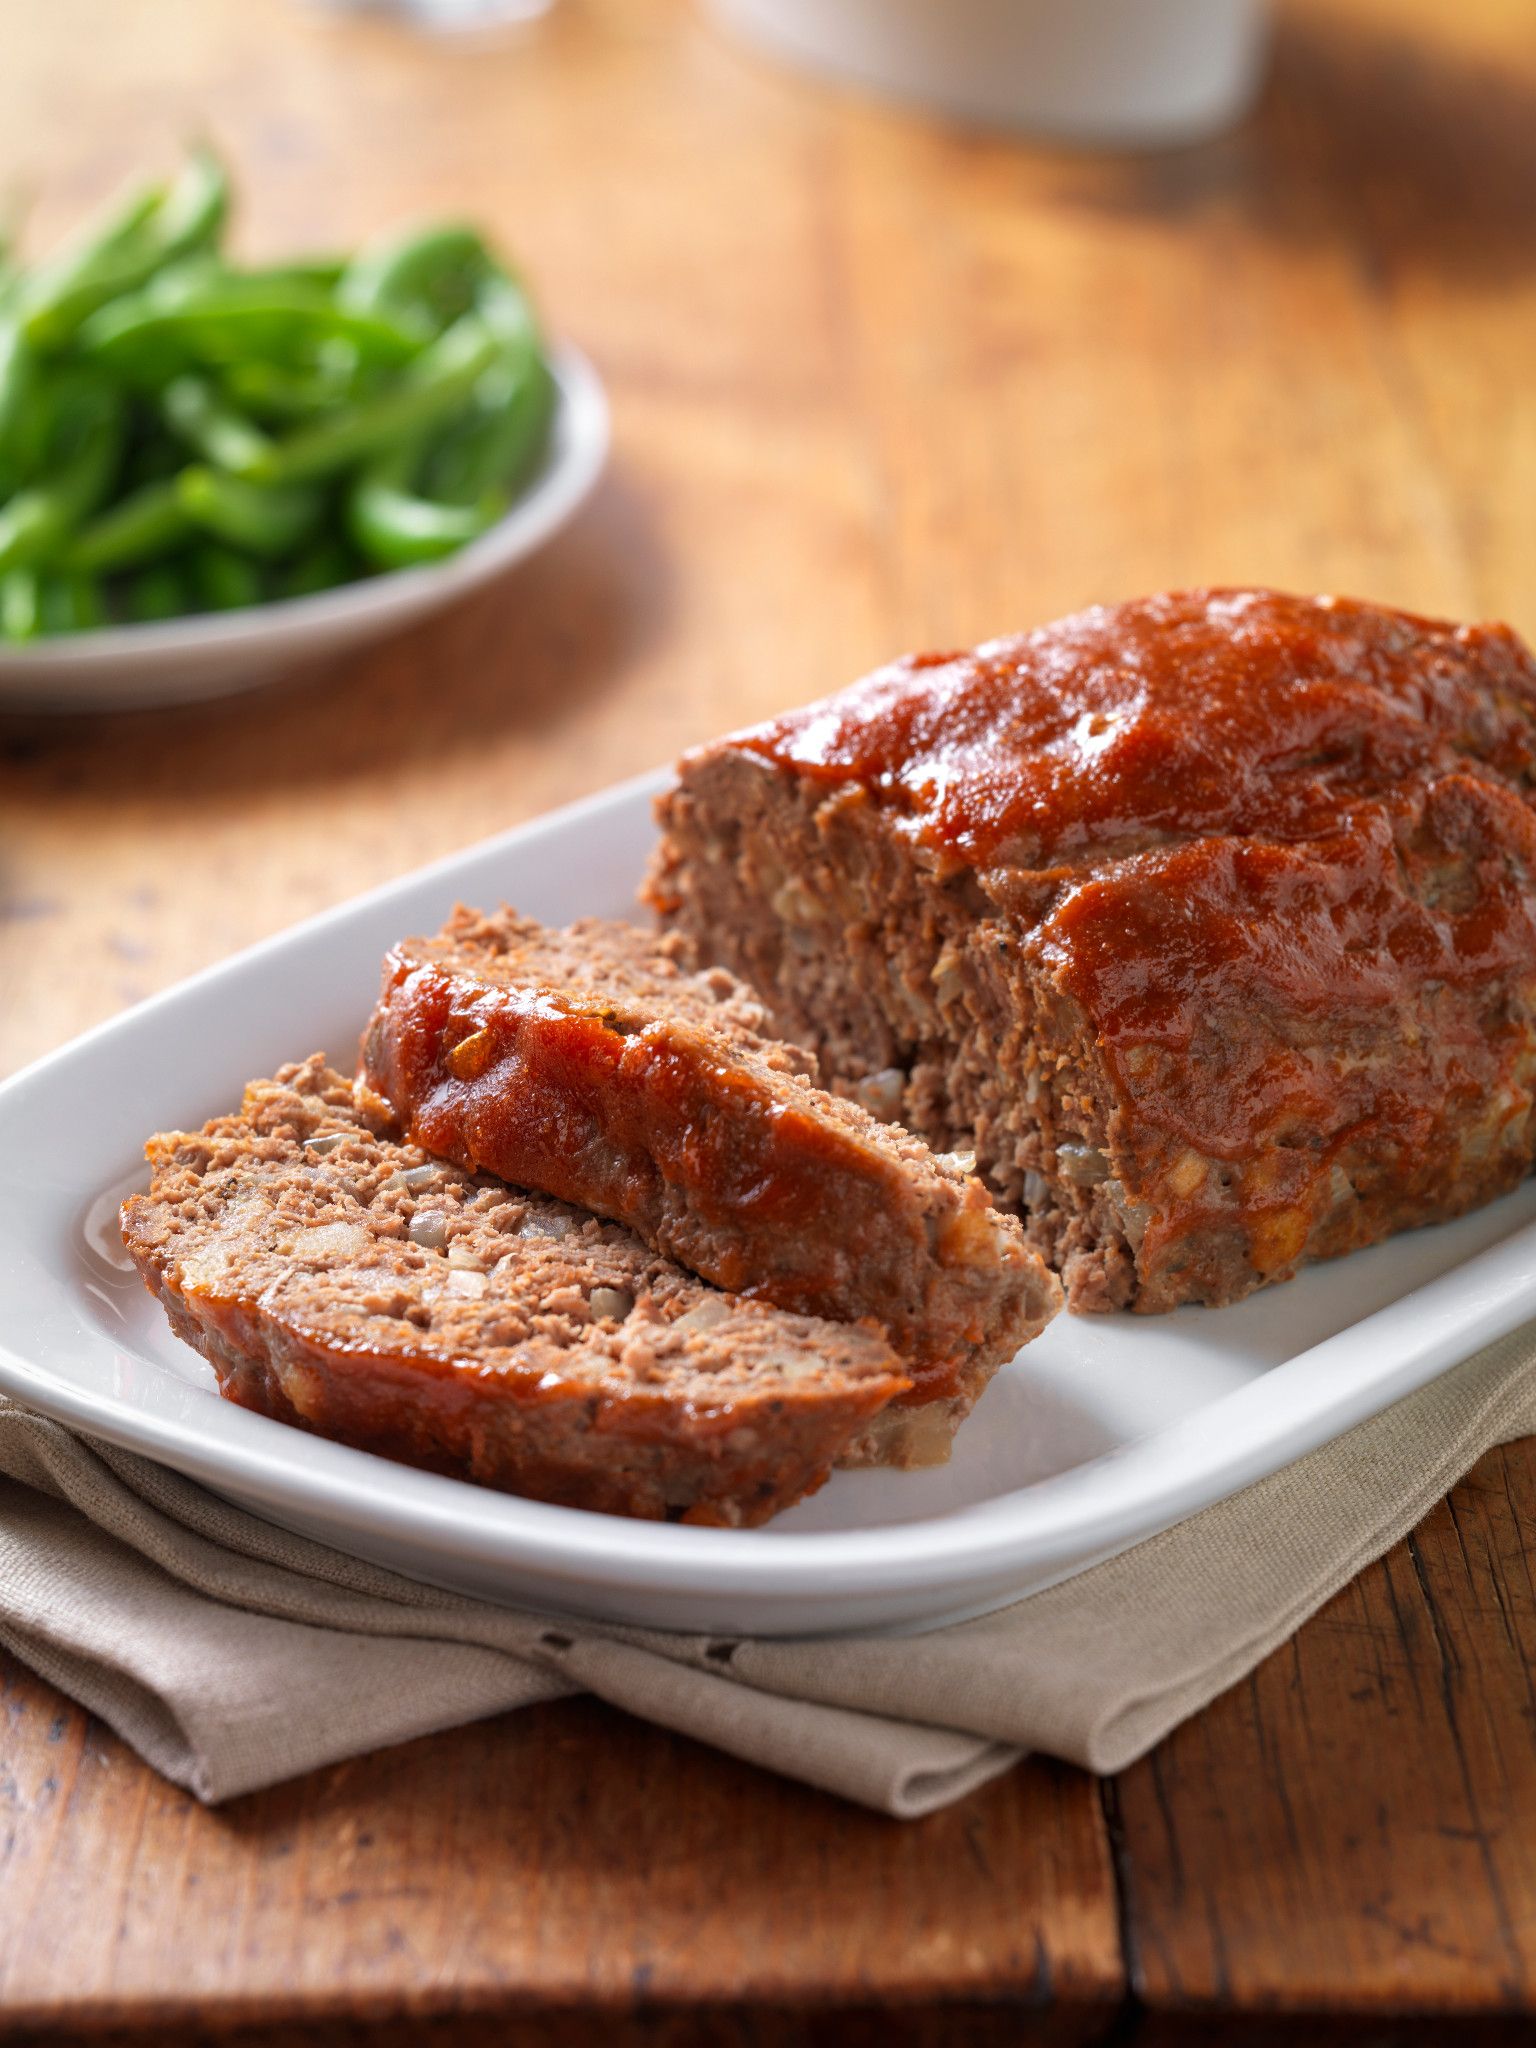 Best 2 Lb Meatloaf Recipes - Doing my best for Him: Vegetable and ...